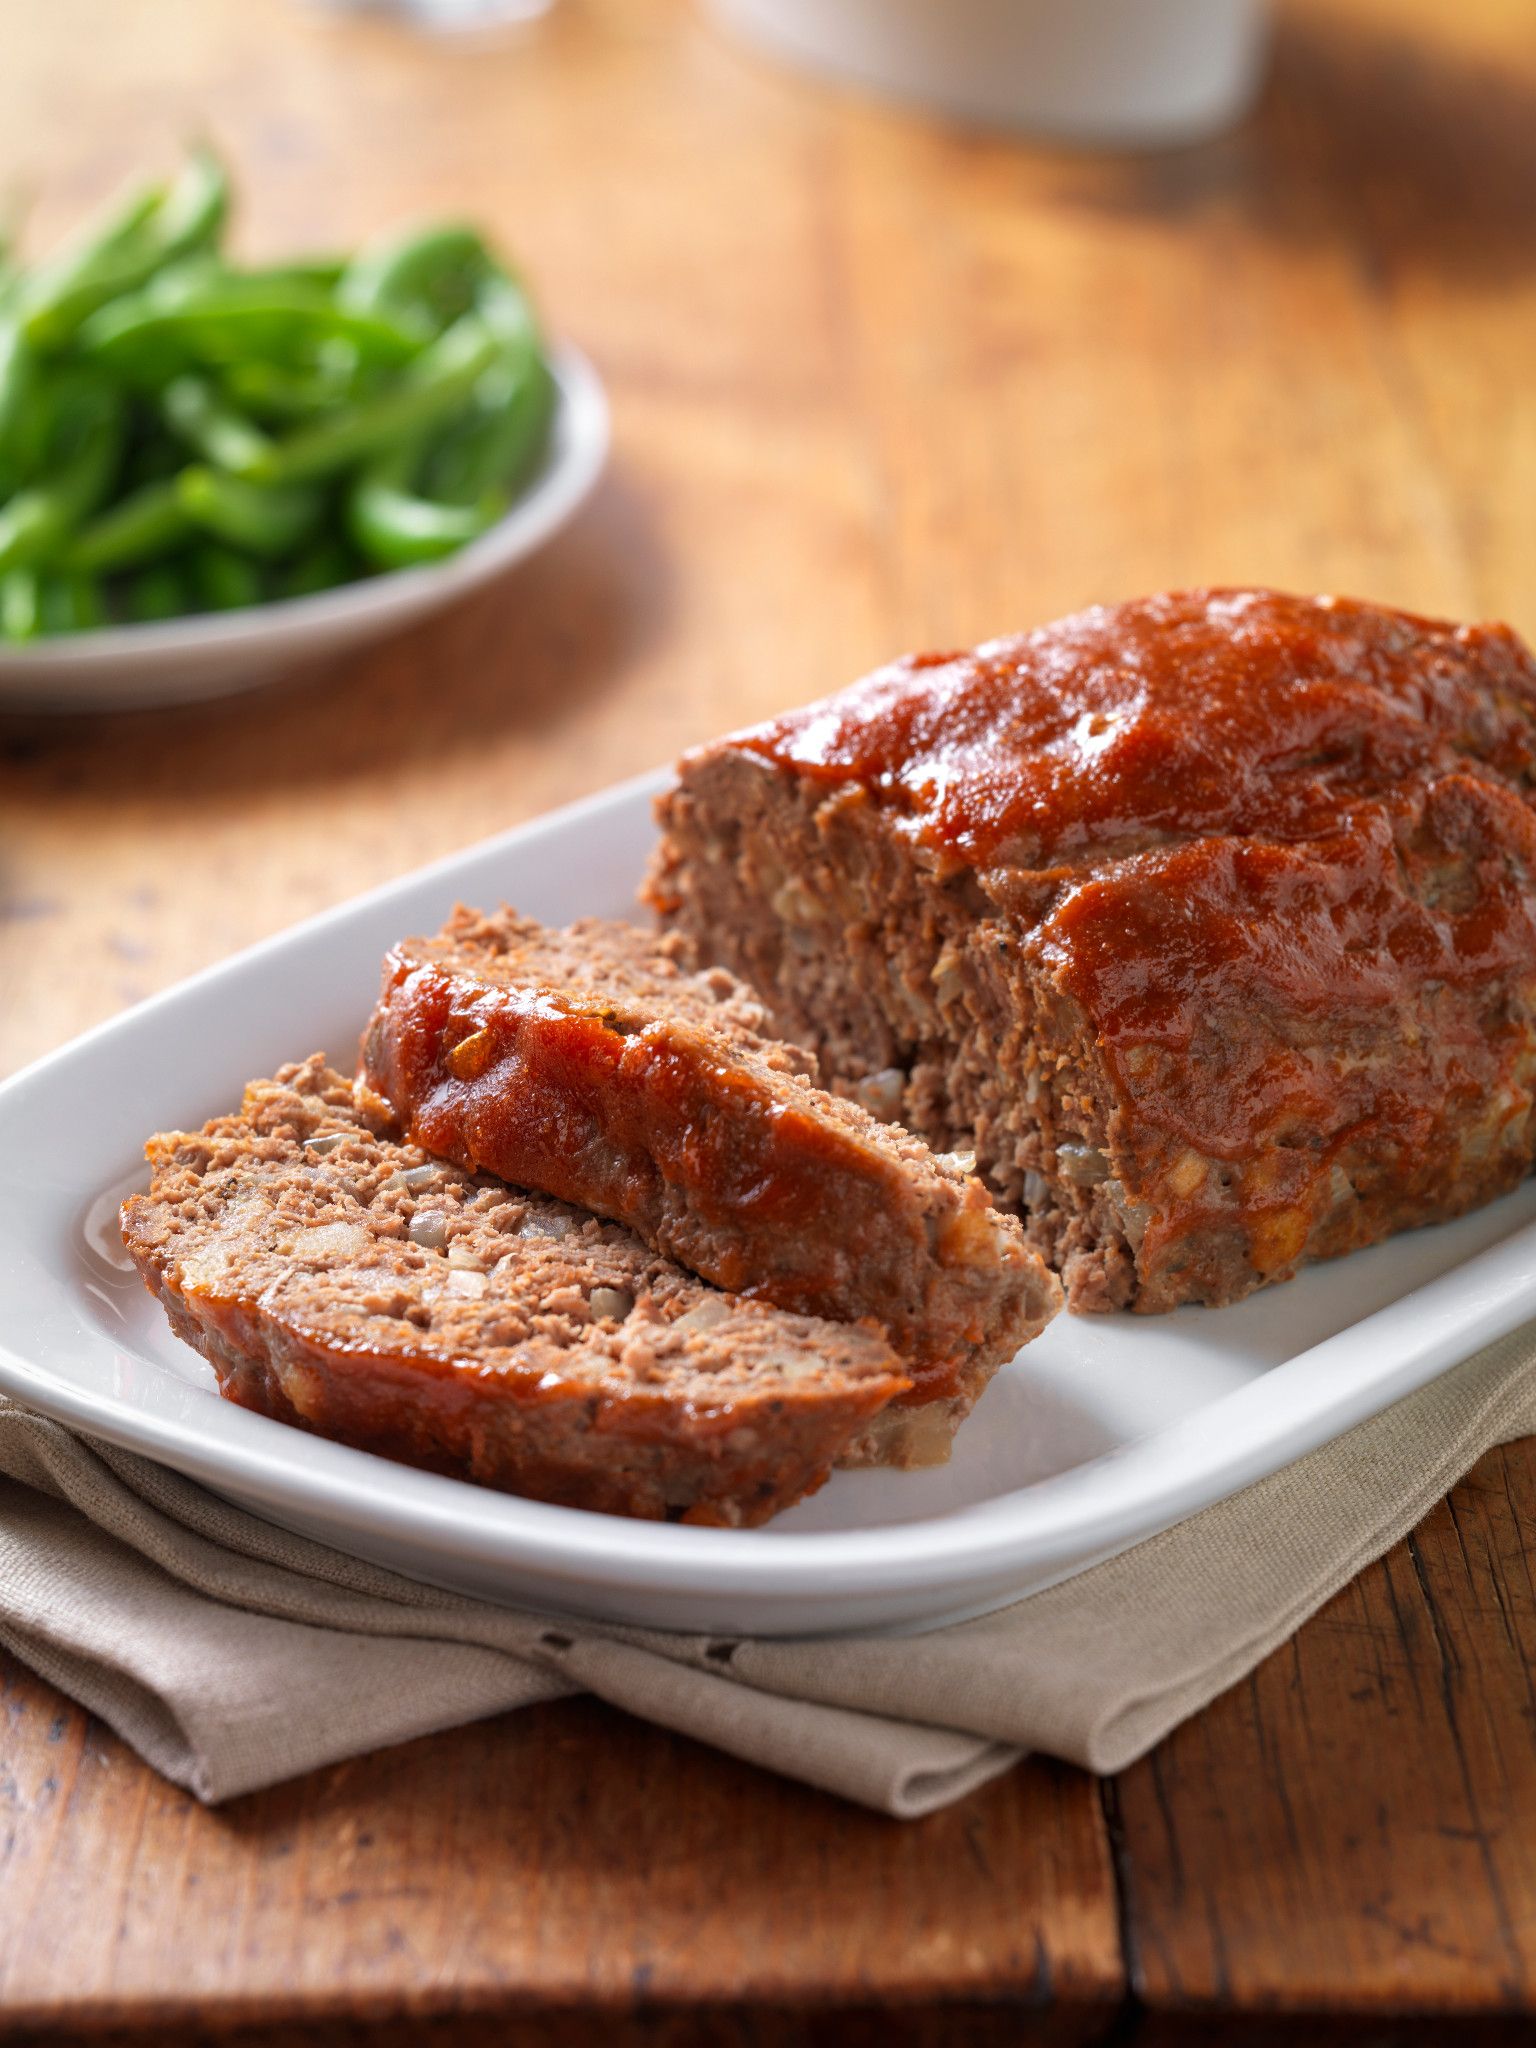 Best 2 Lb Meatloaf Recipes - Doing my best for Him: Vegetable and ...